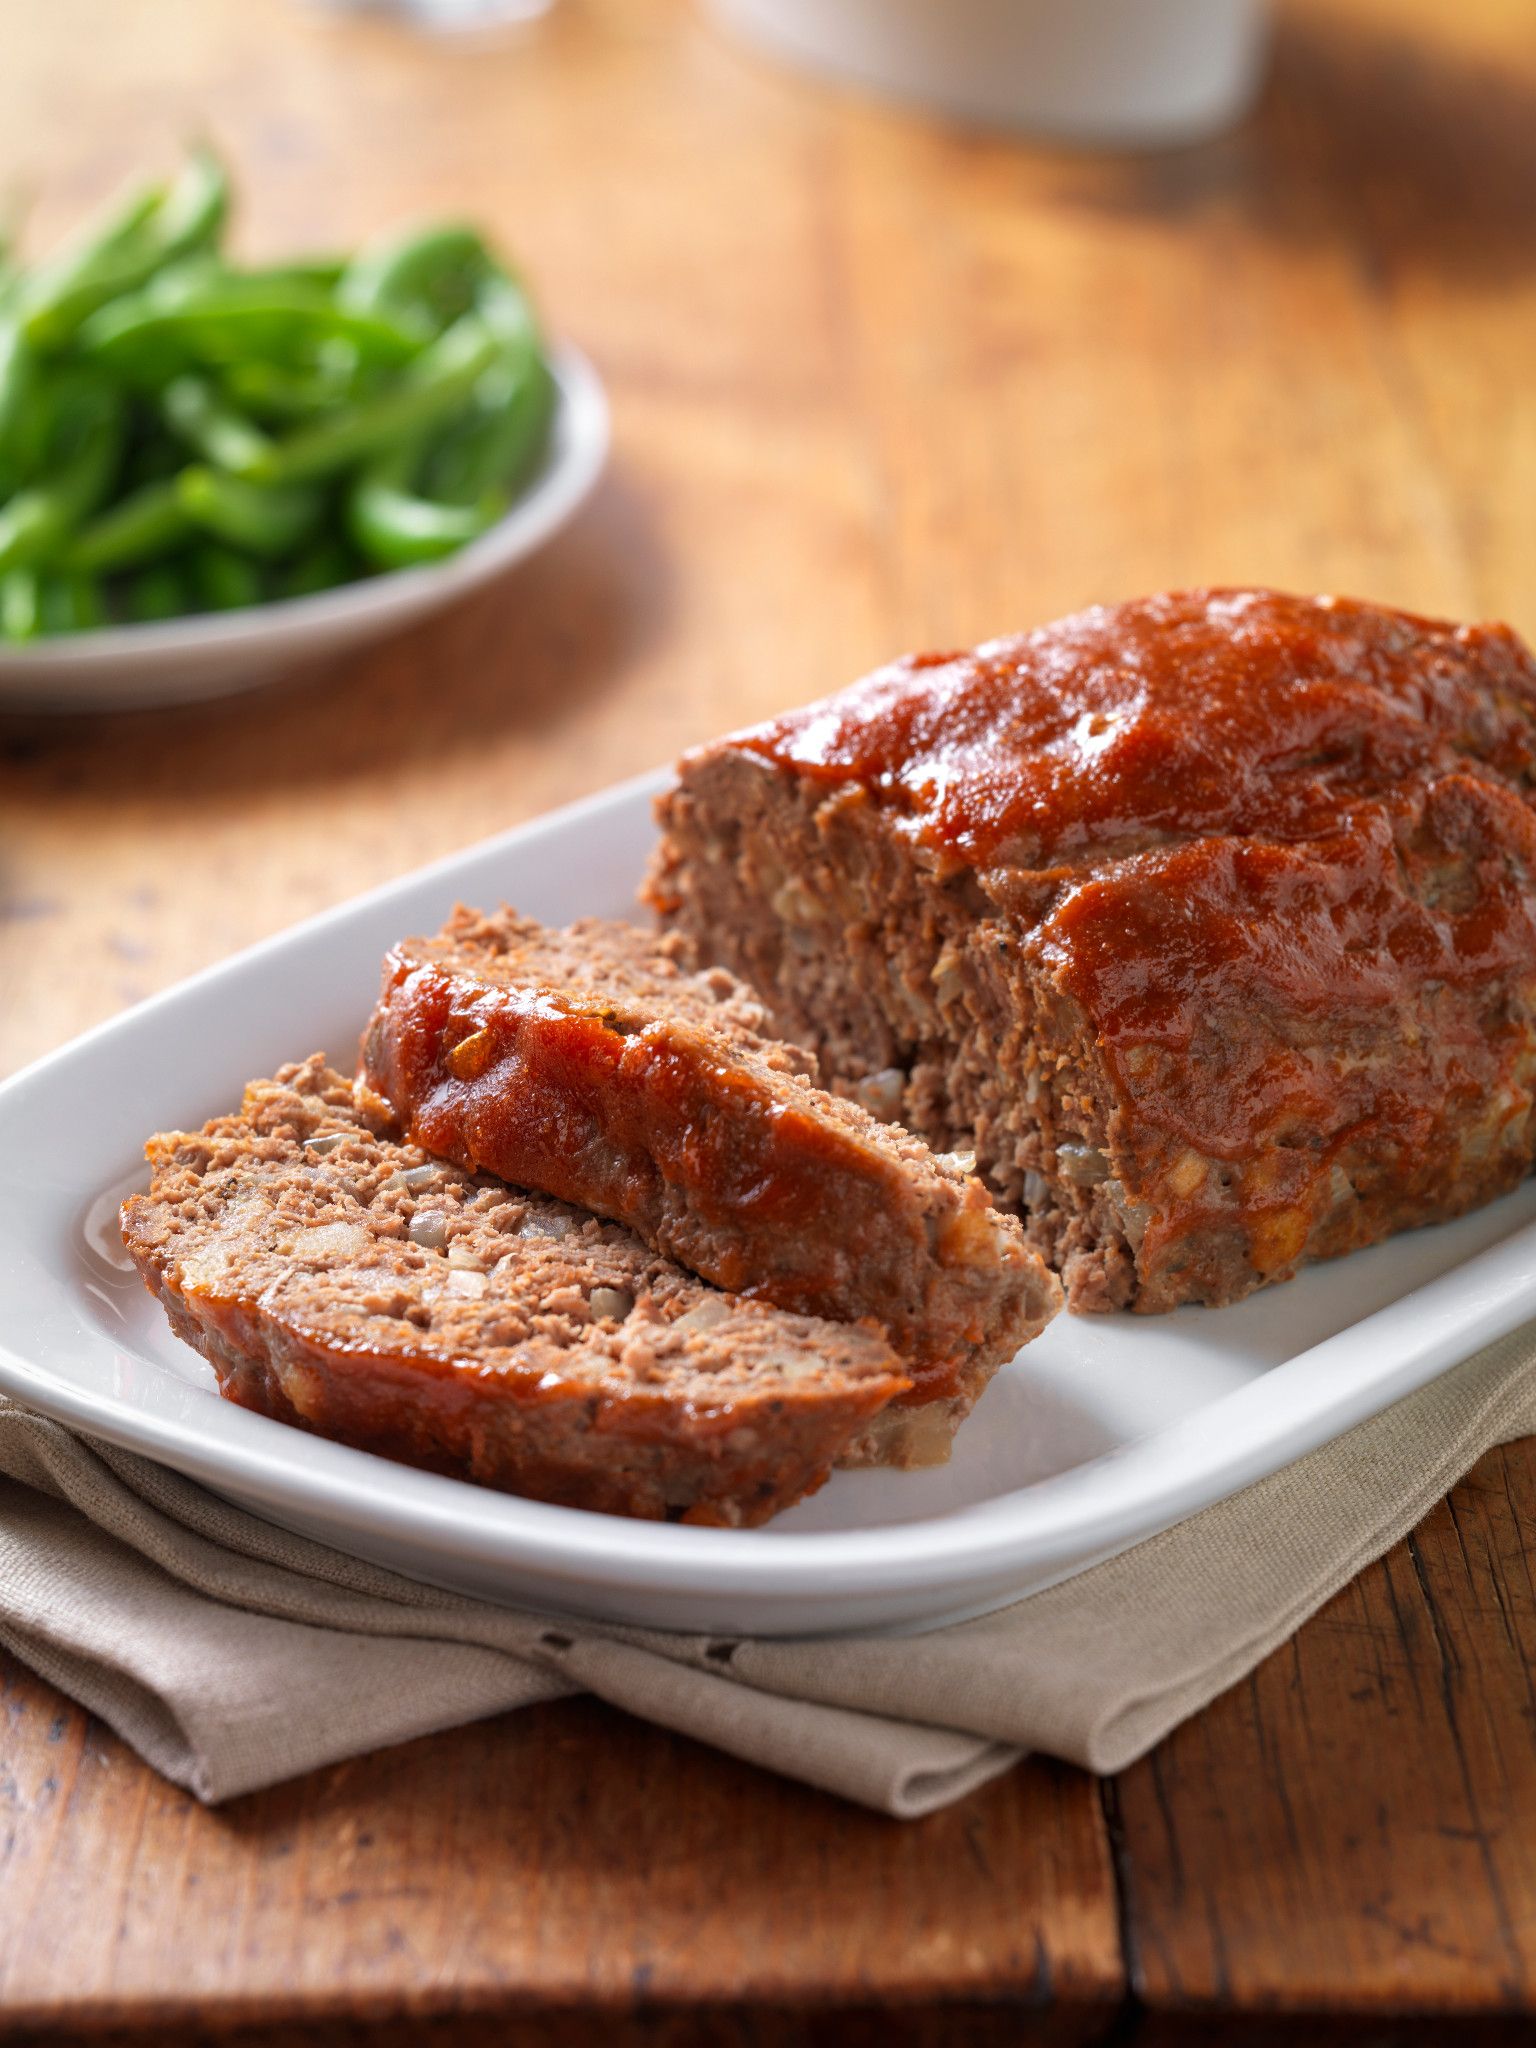 Best 2 Lb Meatloaf Recipes - Doing my best for Him: Vegetable and ...